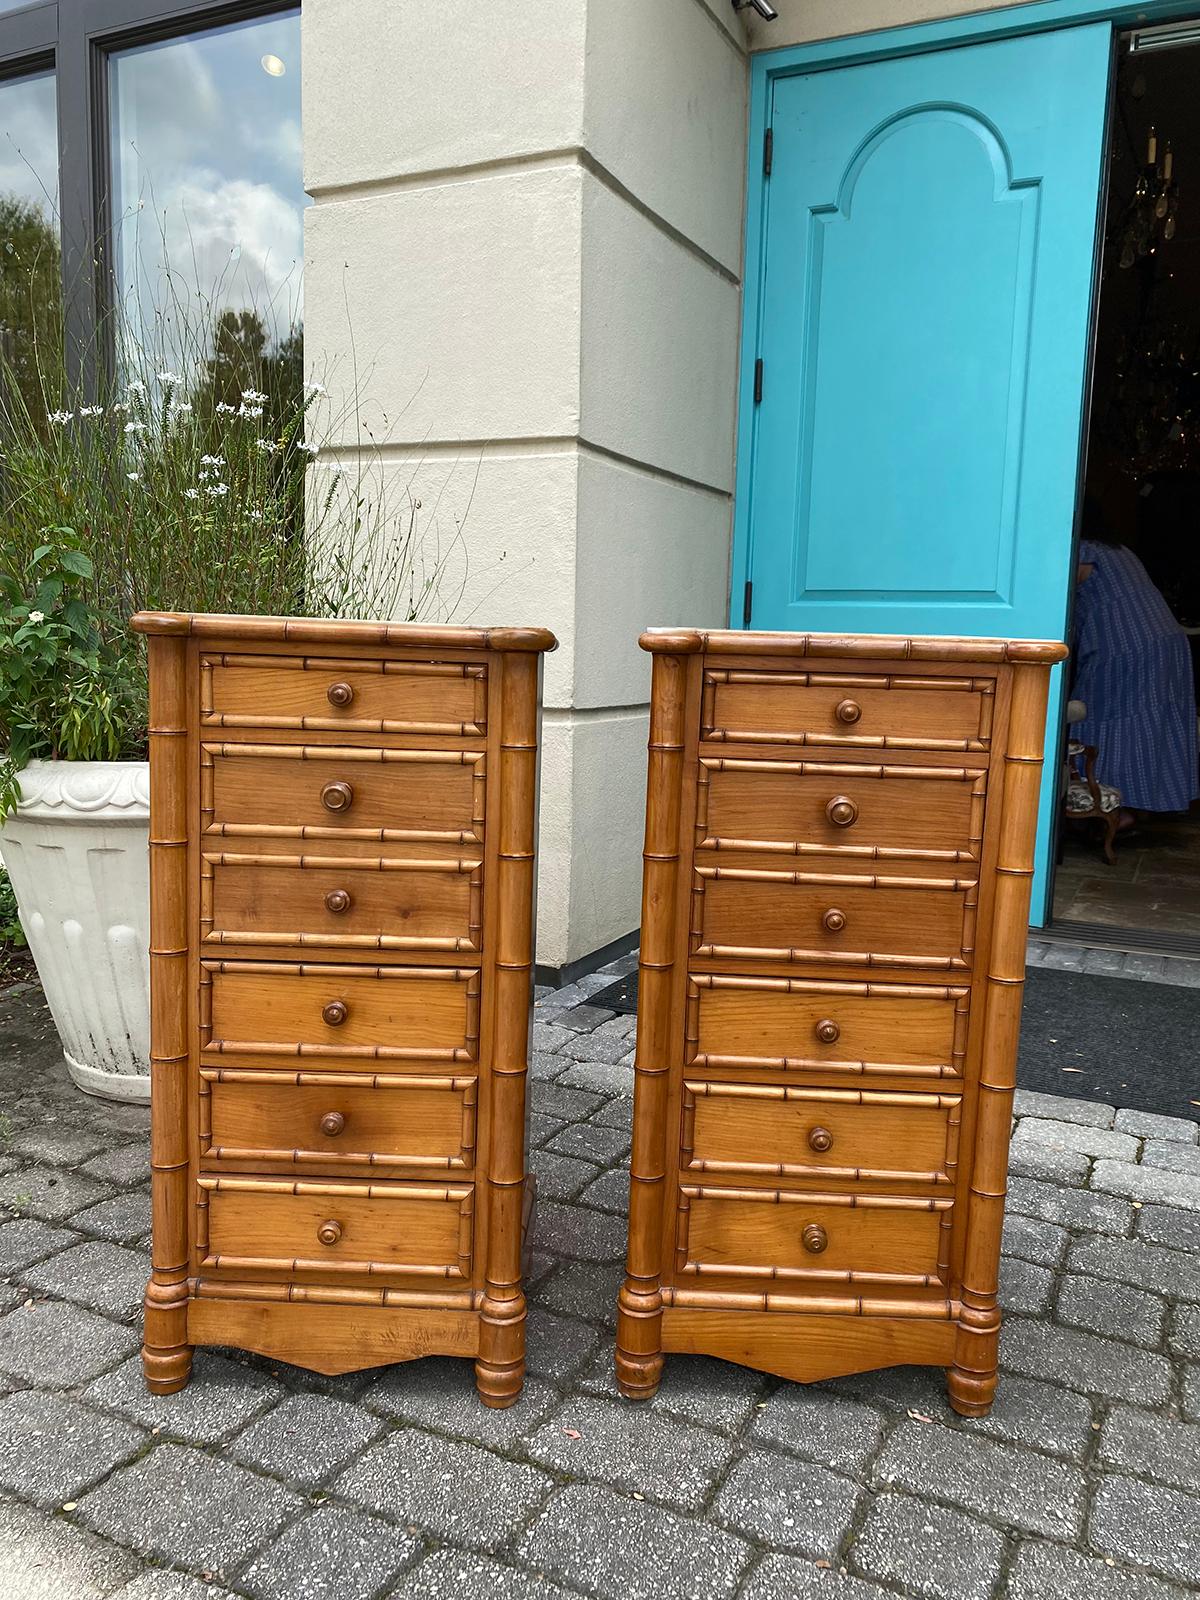 Pair of Circa 1880 French faux bamboo bedside commodes with inset marble tops
4 Drawers, the 2nd pull from the top opens down to reveal storage - not a drawer.